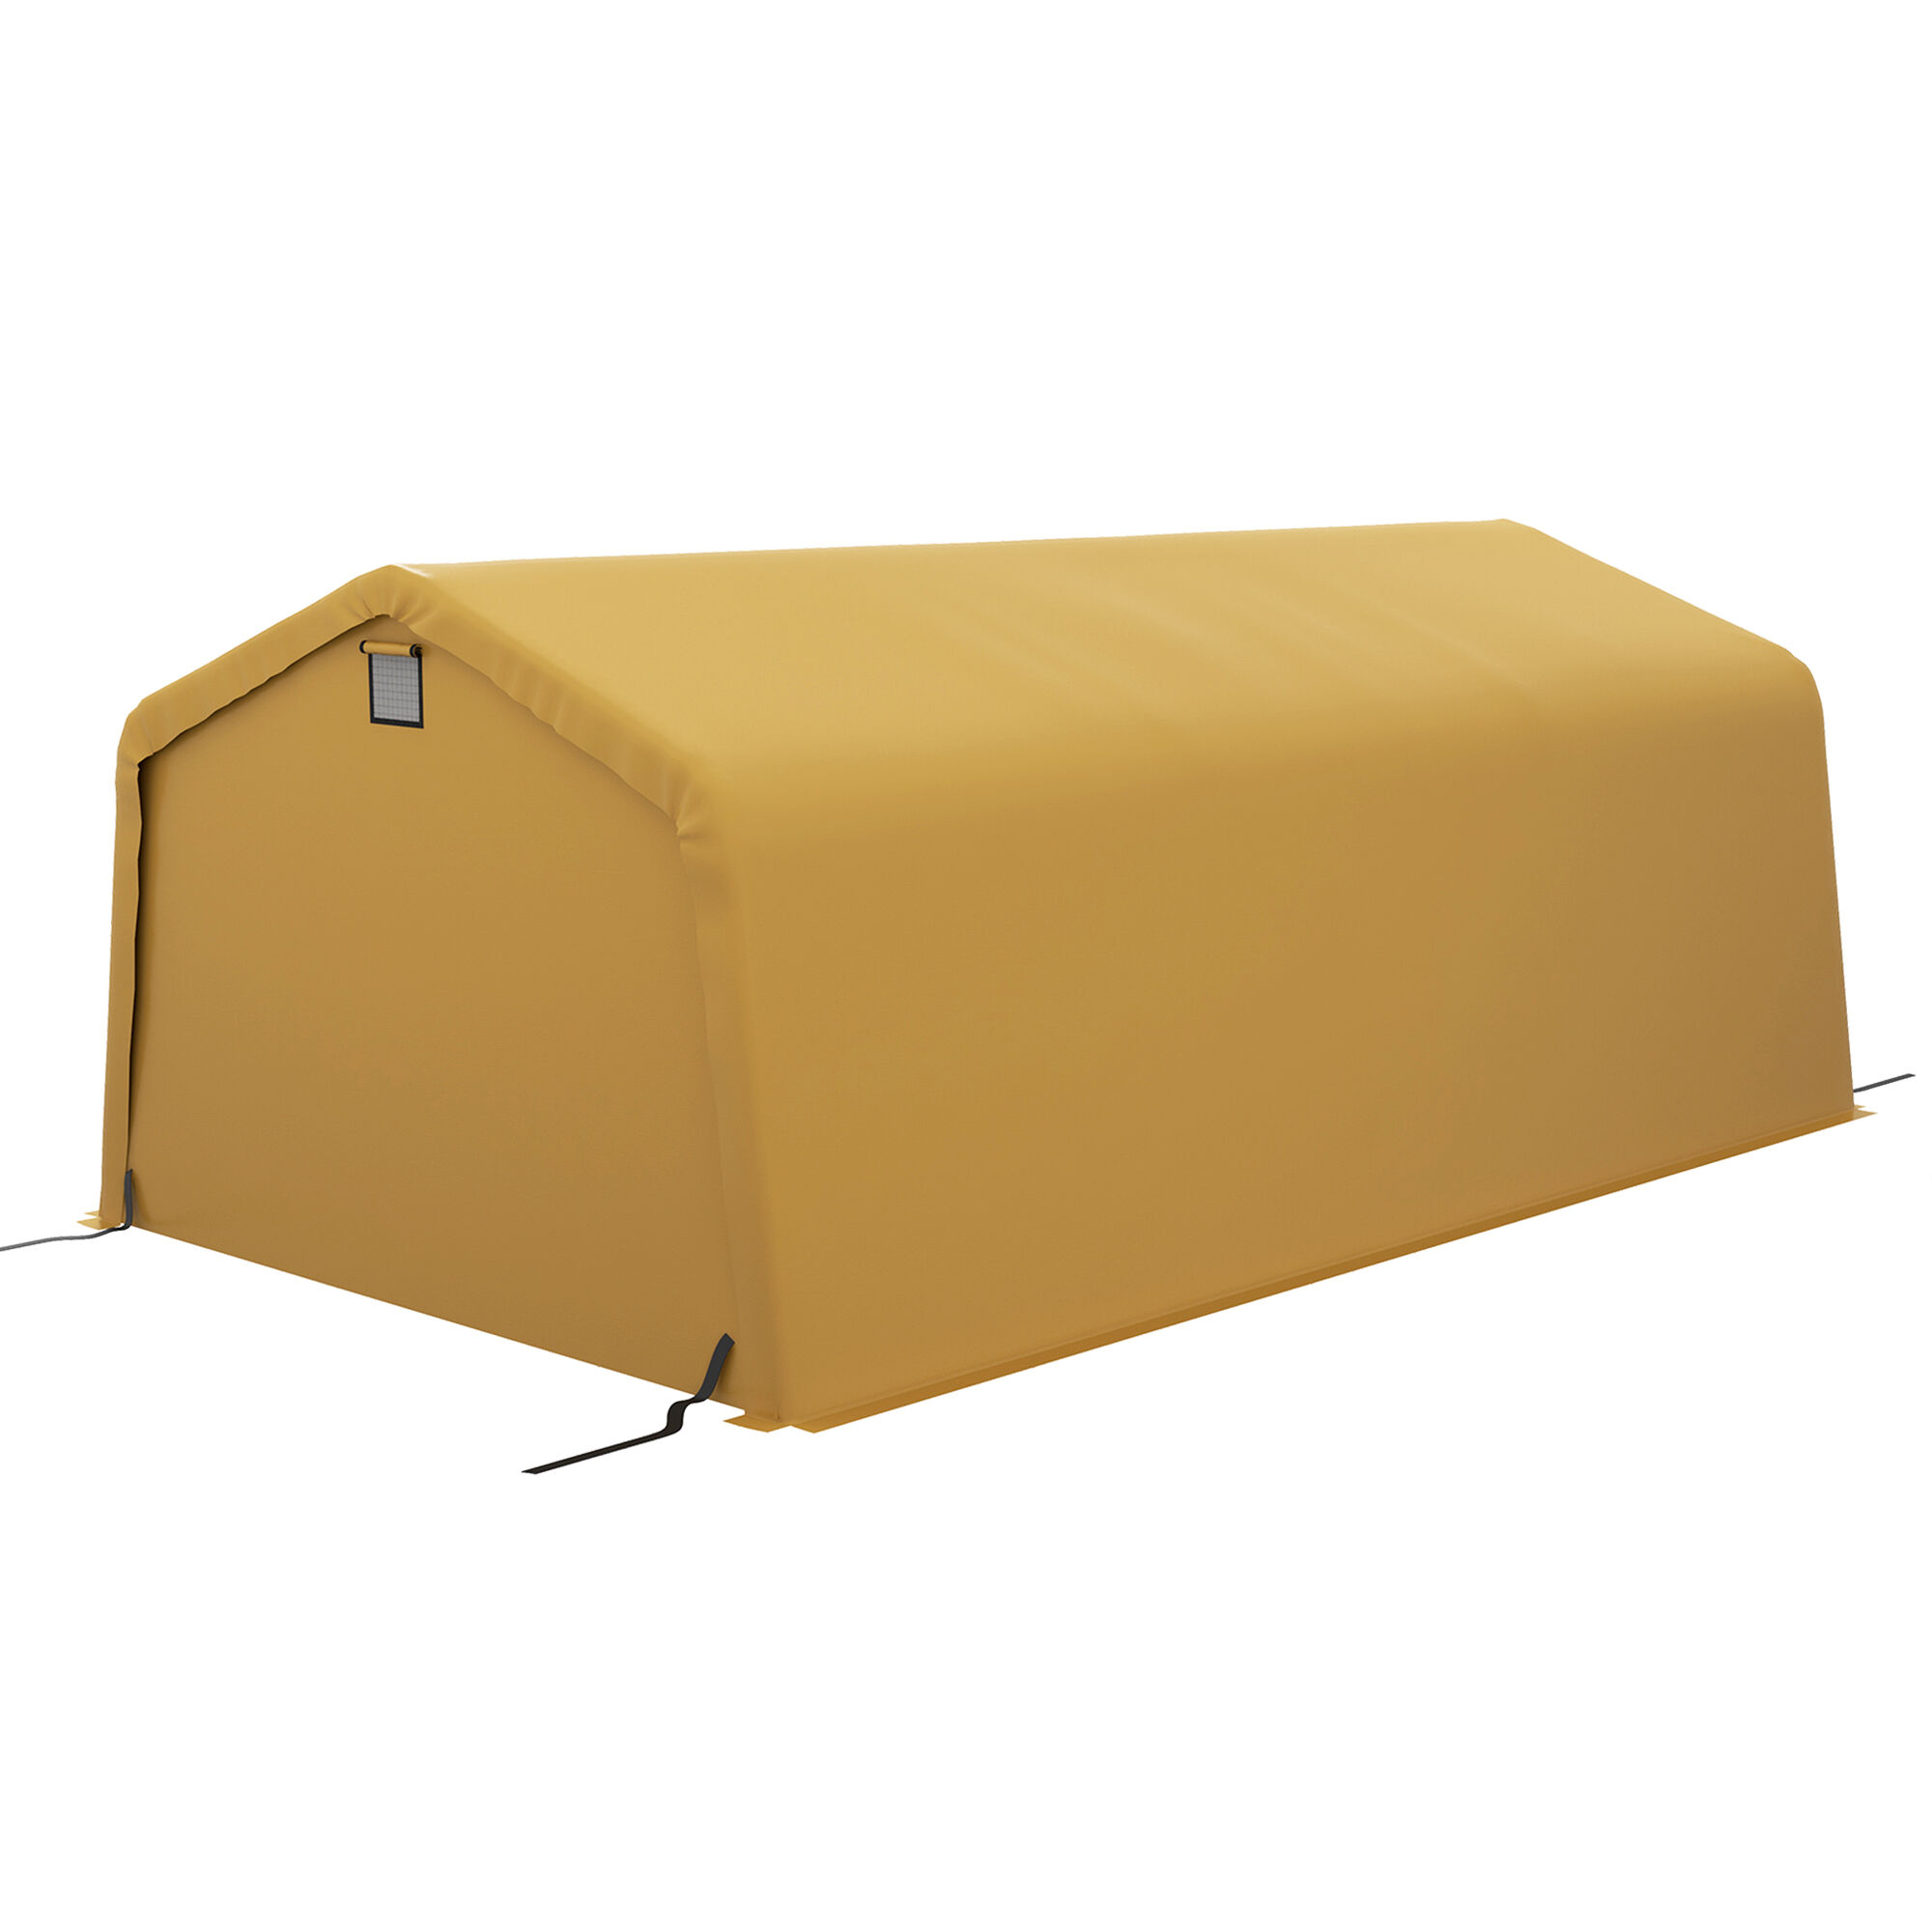 Outsunny Carport 12' x 20' Portable Garage, Heavy Duty Car Port Canopy with Ventilation Windows and Large Roll-up Door, Beige